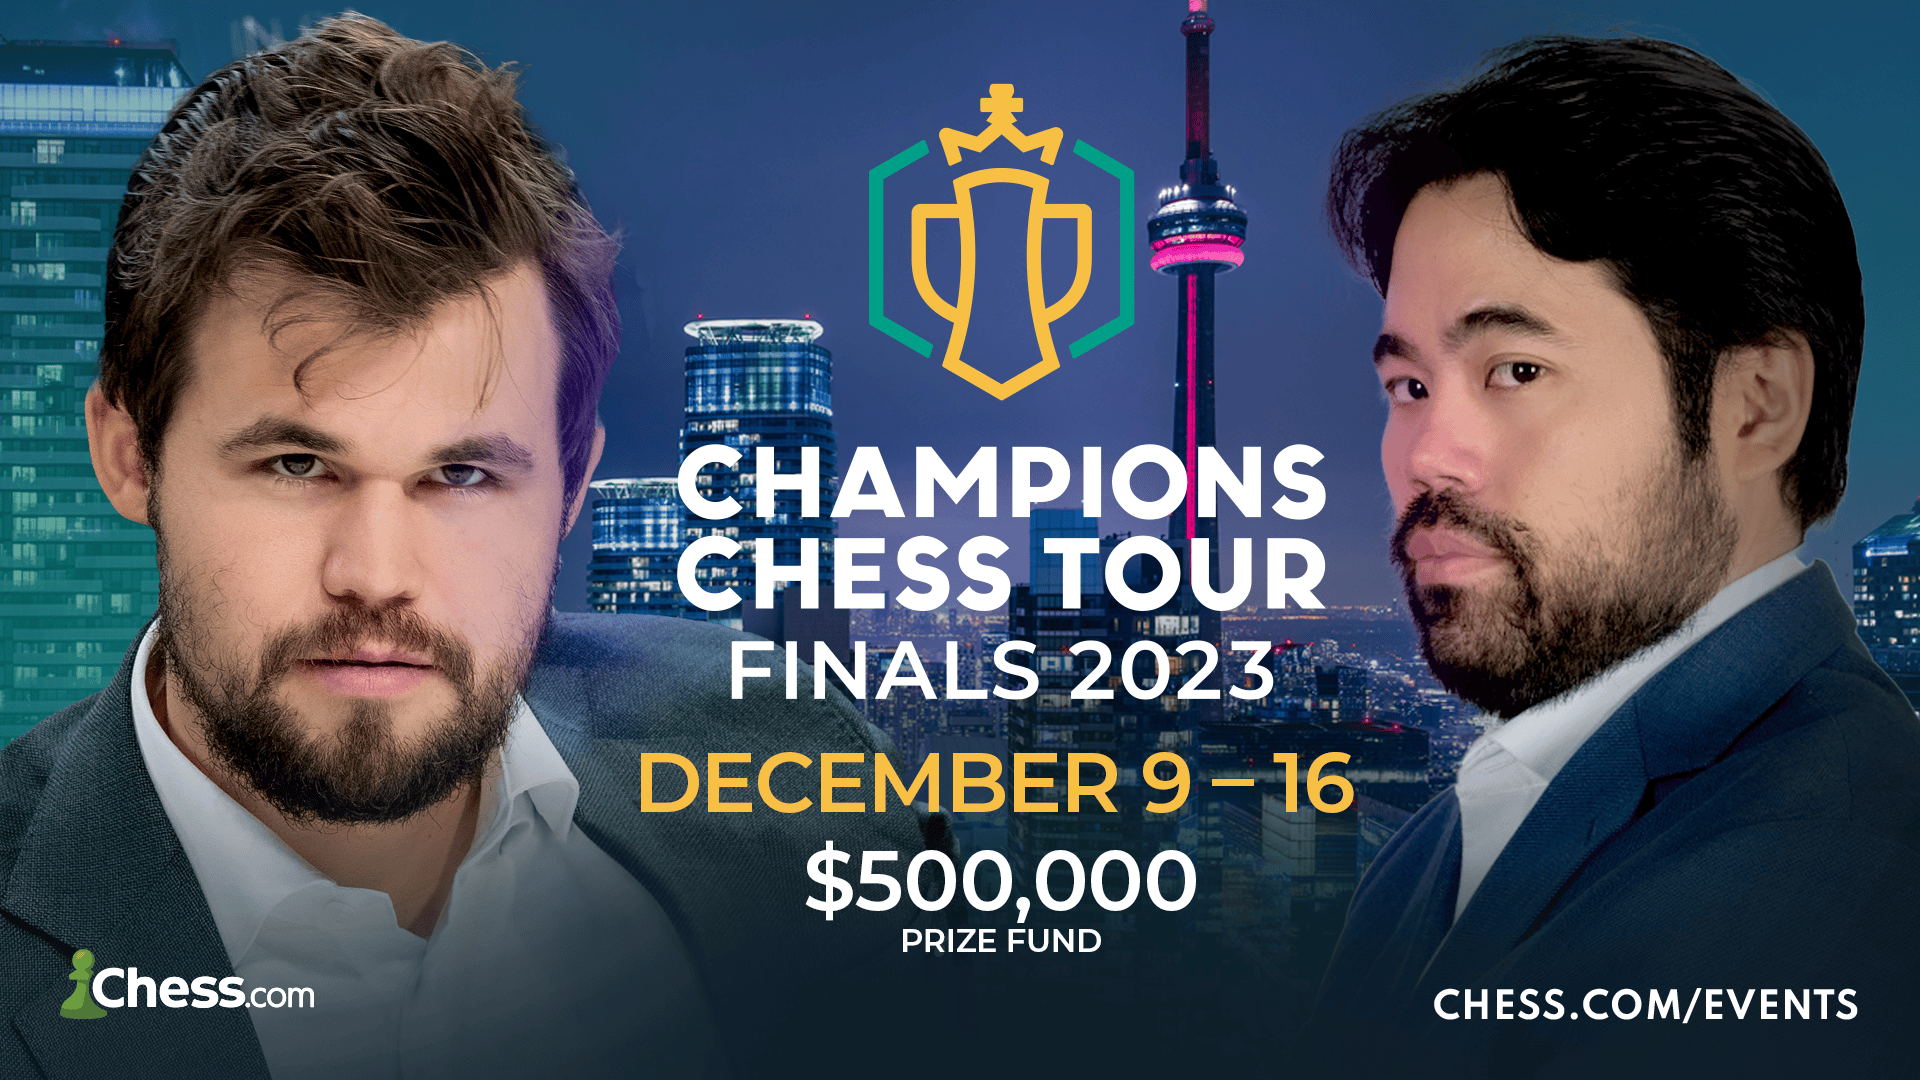 2023 Champions Chess Tour: All The Information 